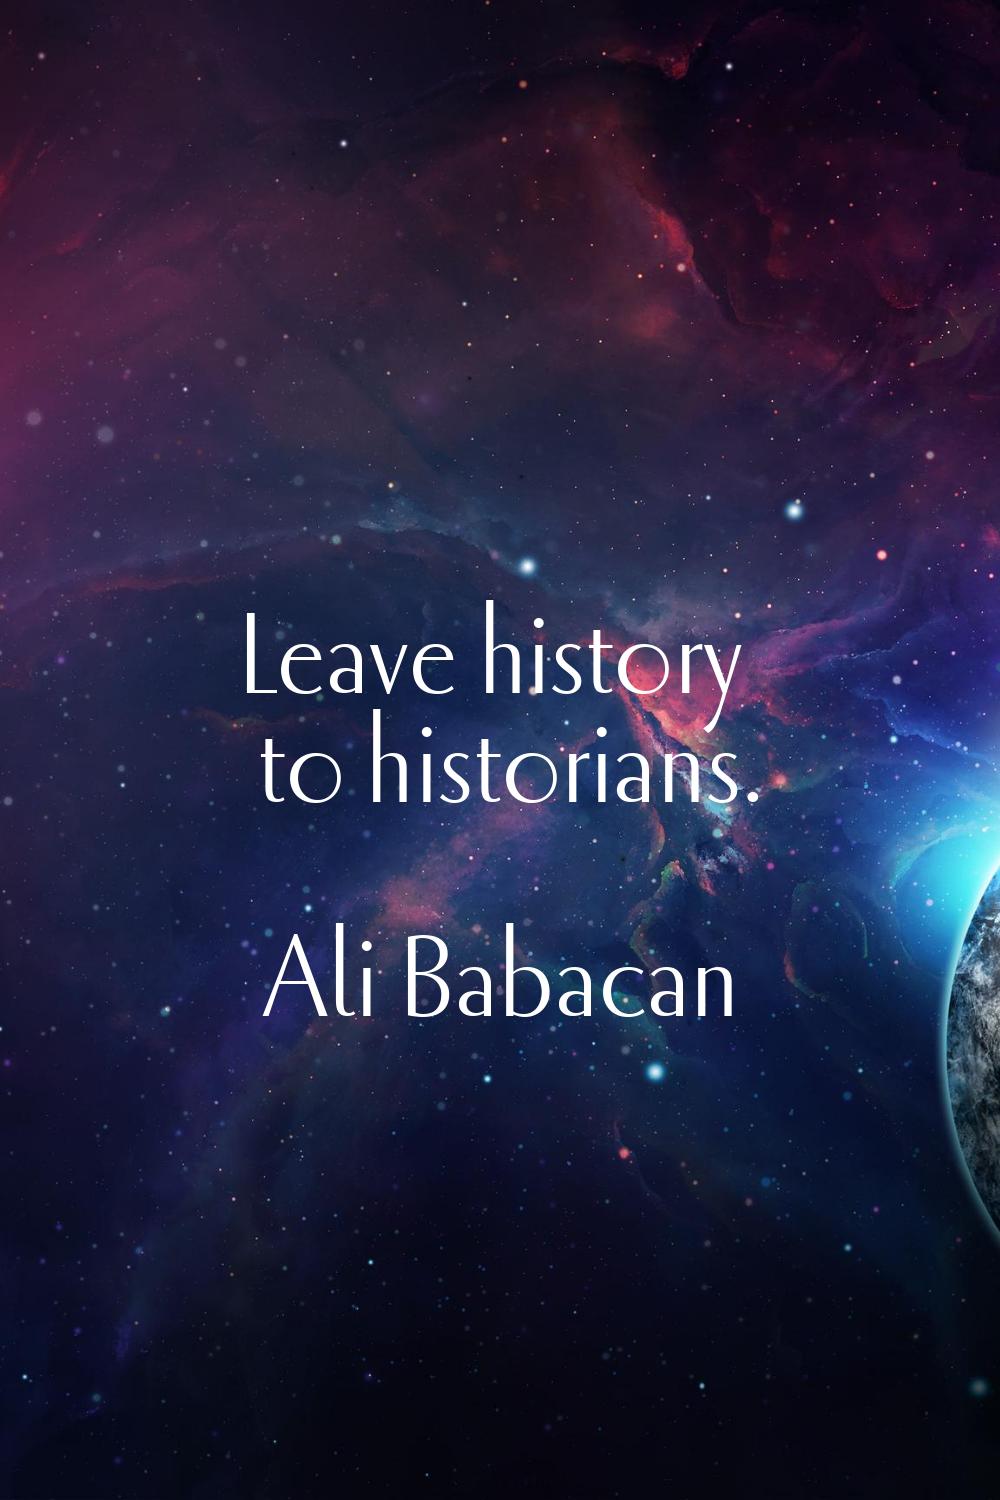 Leave history to historians.